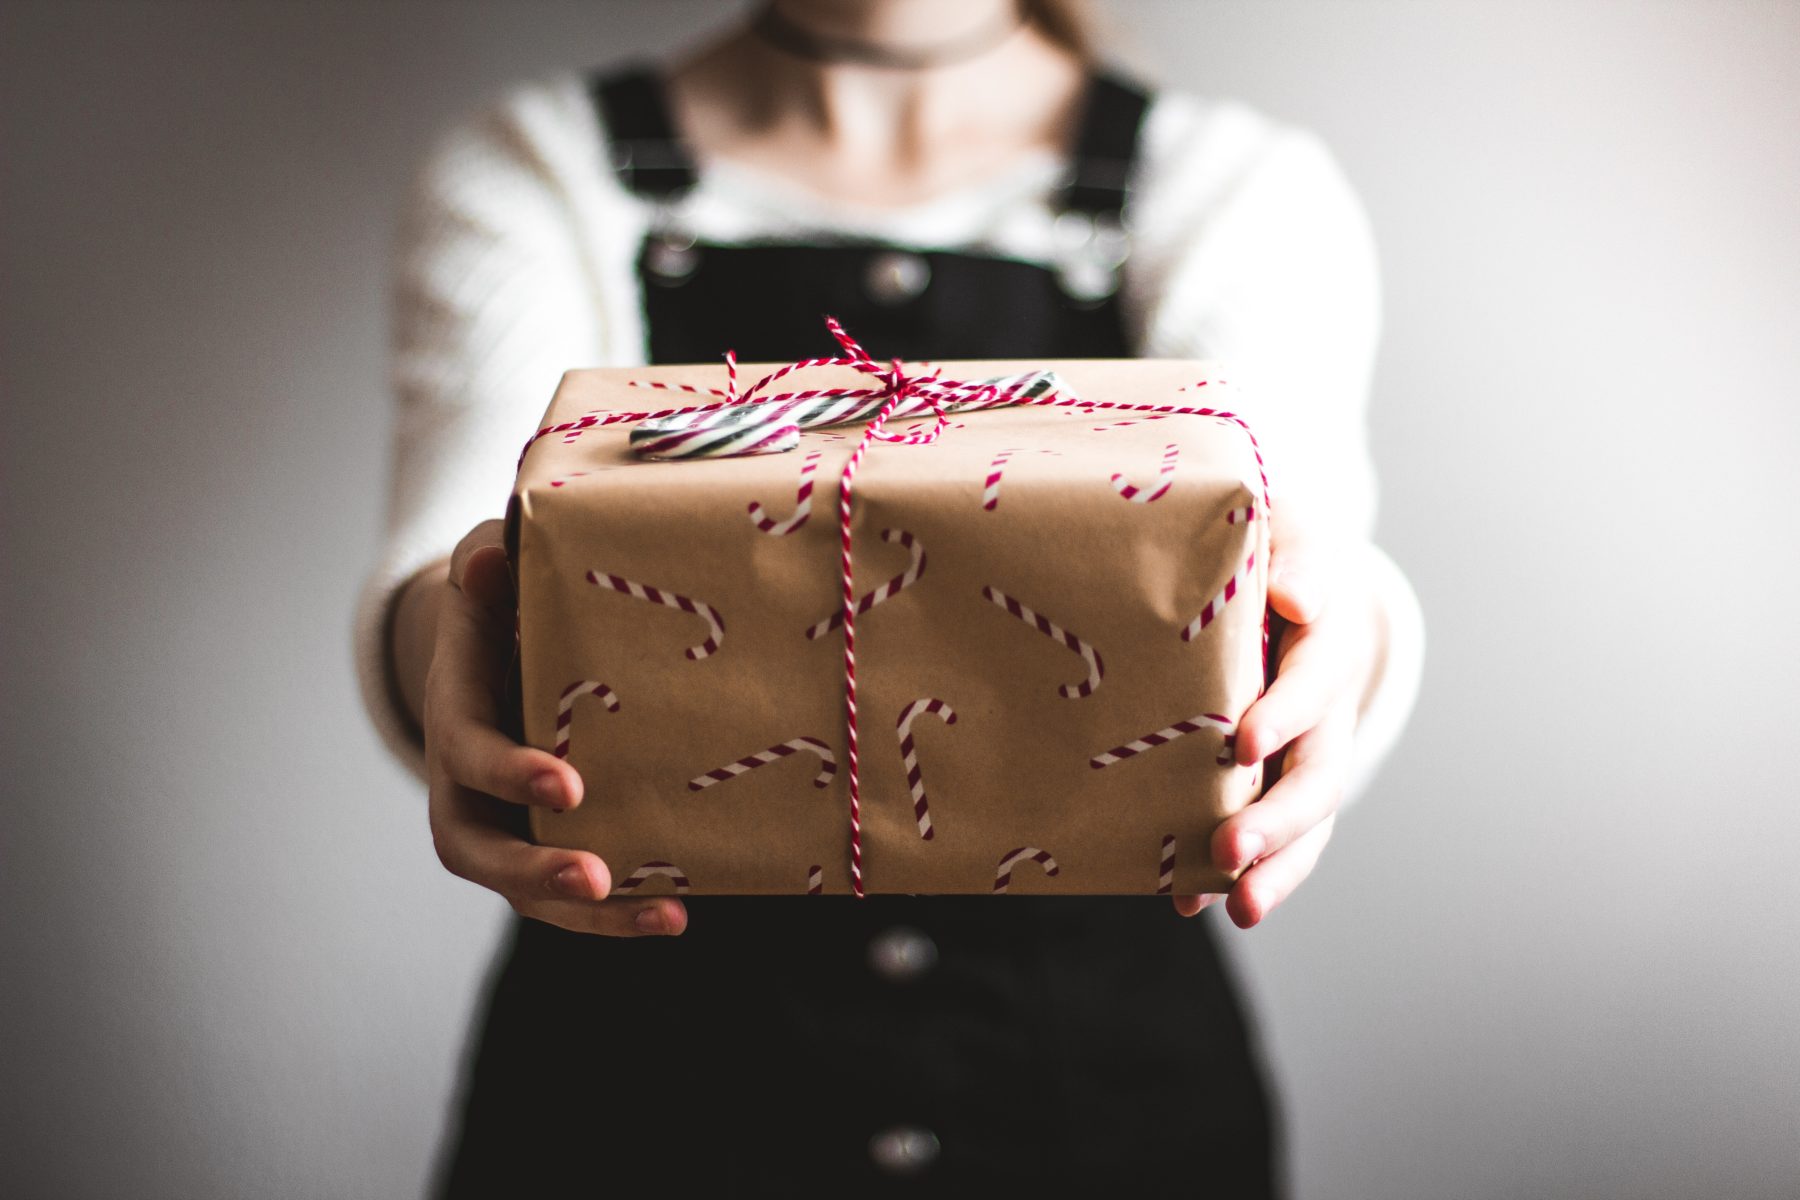 A person holding a wrapped Christmas present, with arms outstretched.